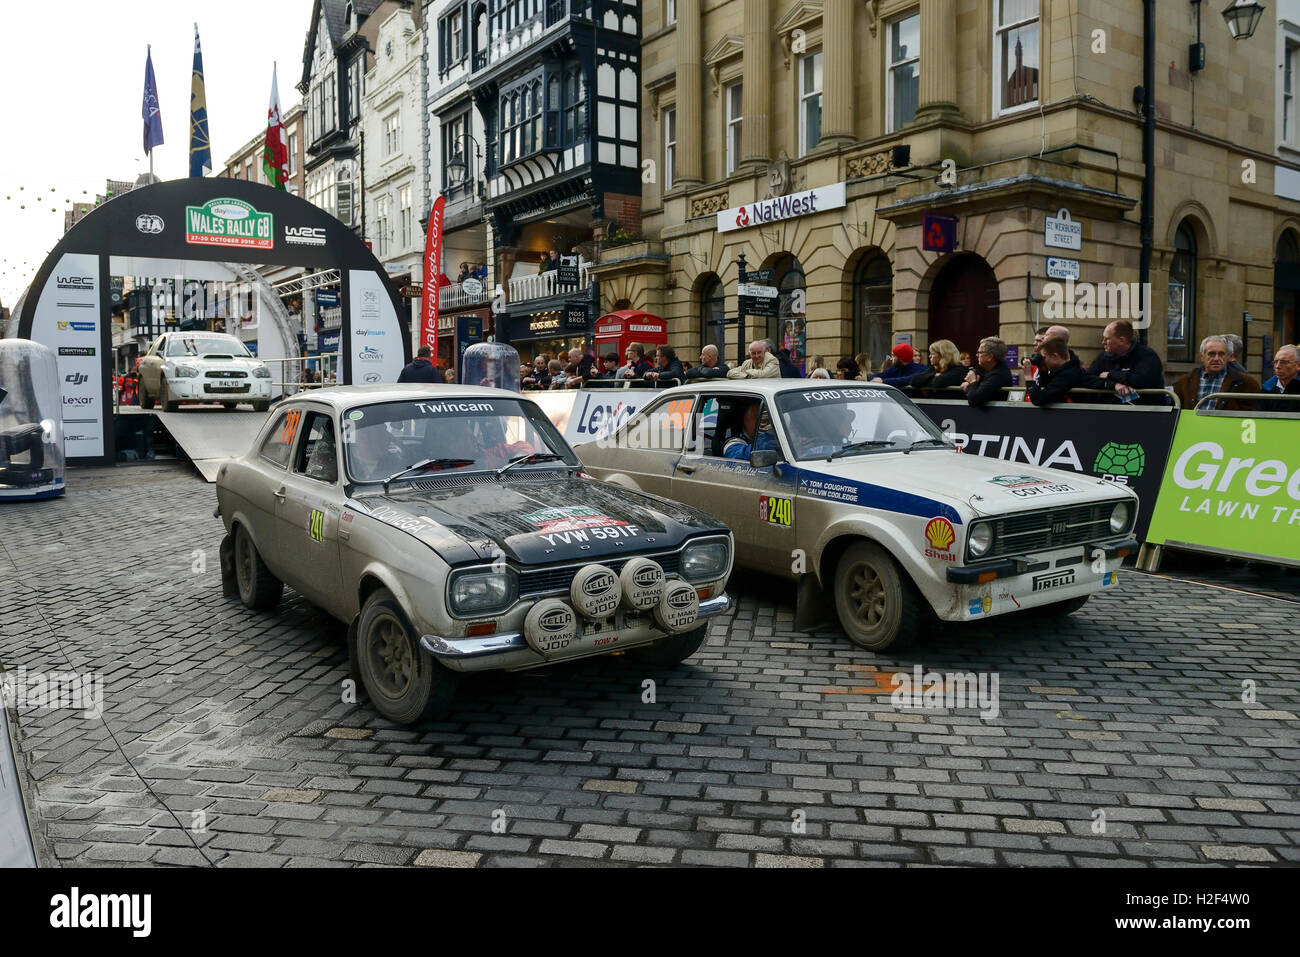 Chester, UK. 28th October, 2016. Wales Rally GB. At the end of day one, Ford Escort cars competing in the WRGB National Rally drive through Chester City centre. Credit: Andrew Paterson/Alamy Live News Stock Photo